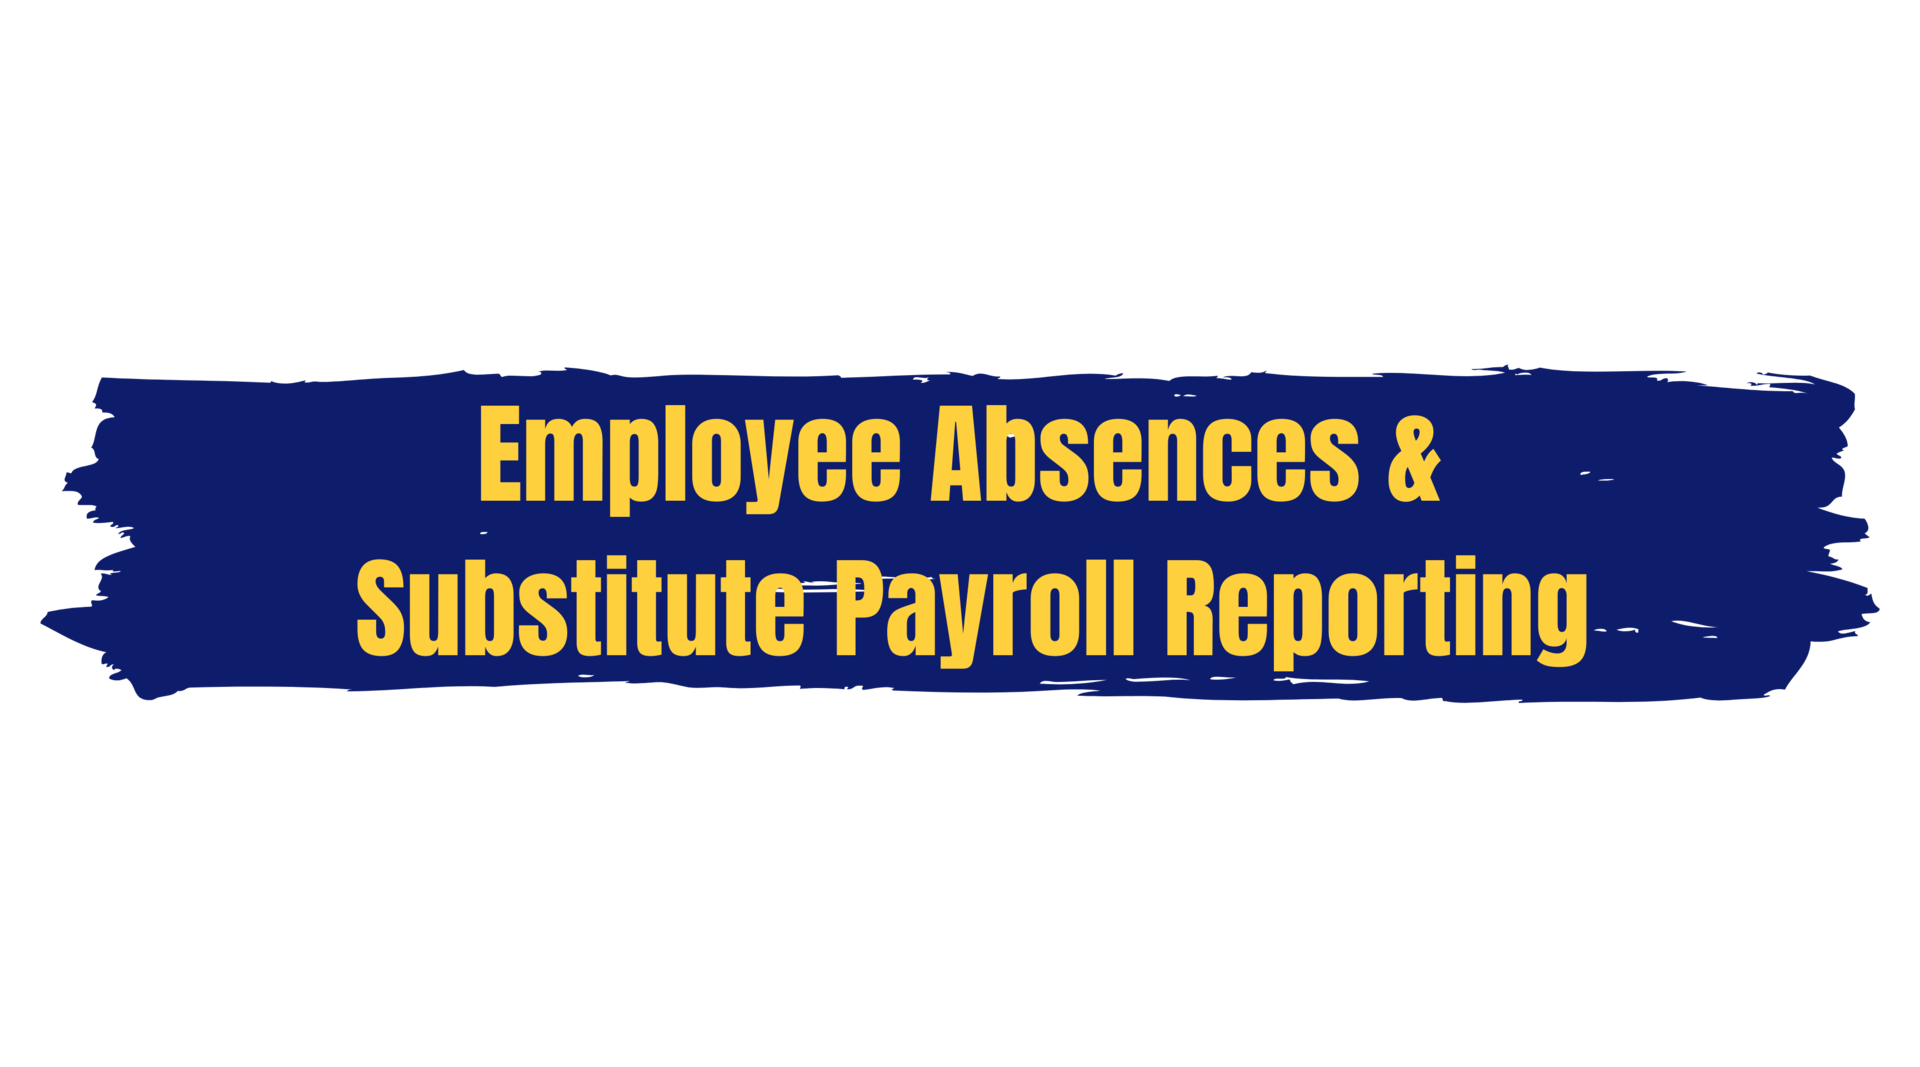 Employee Absences & Substitute Payroll Reporting